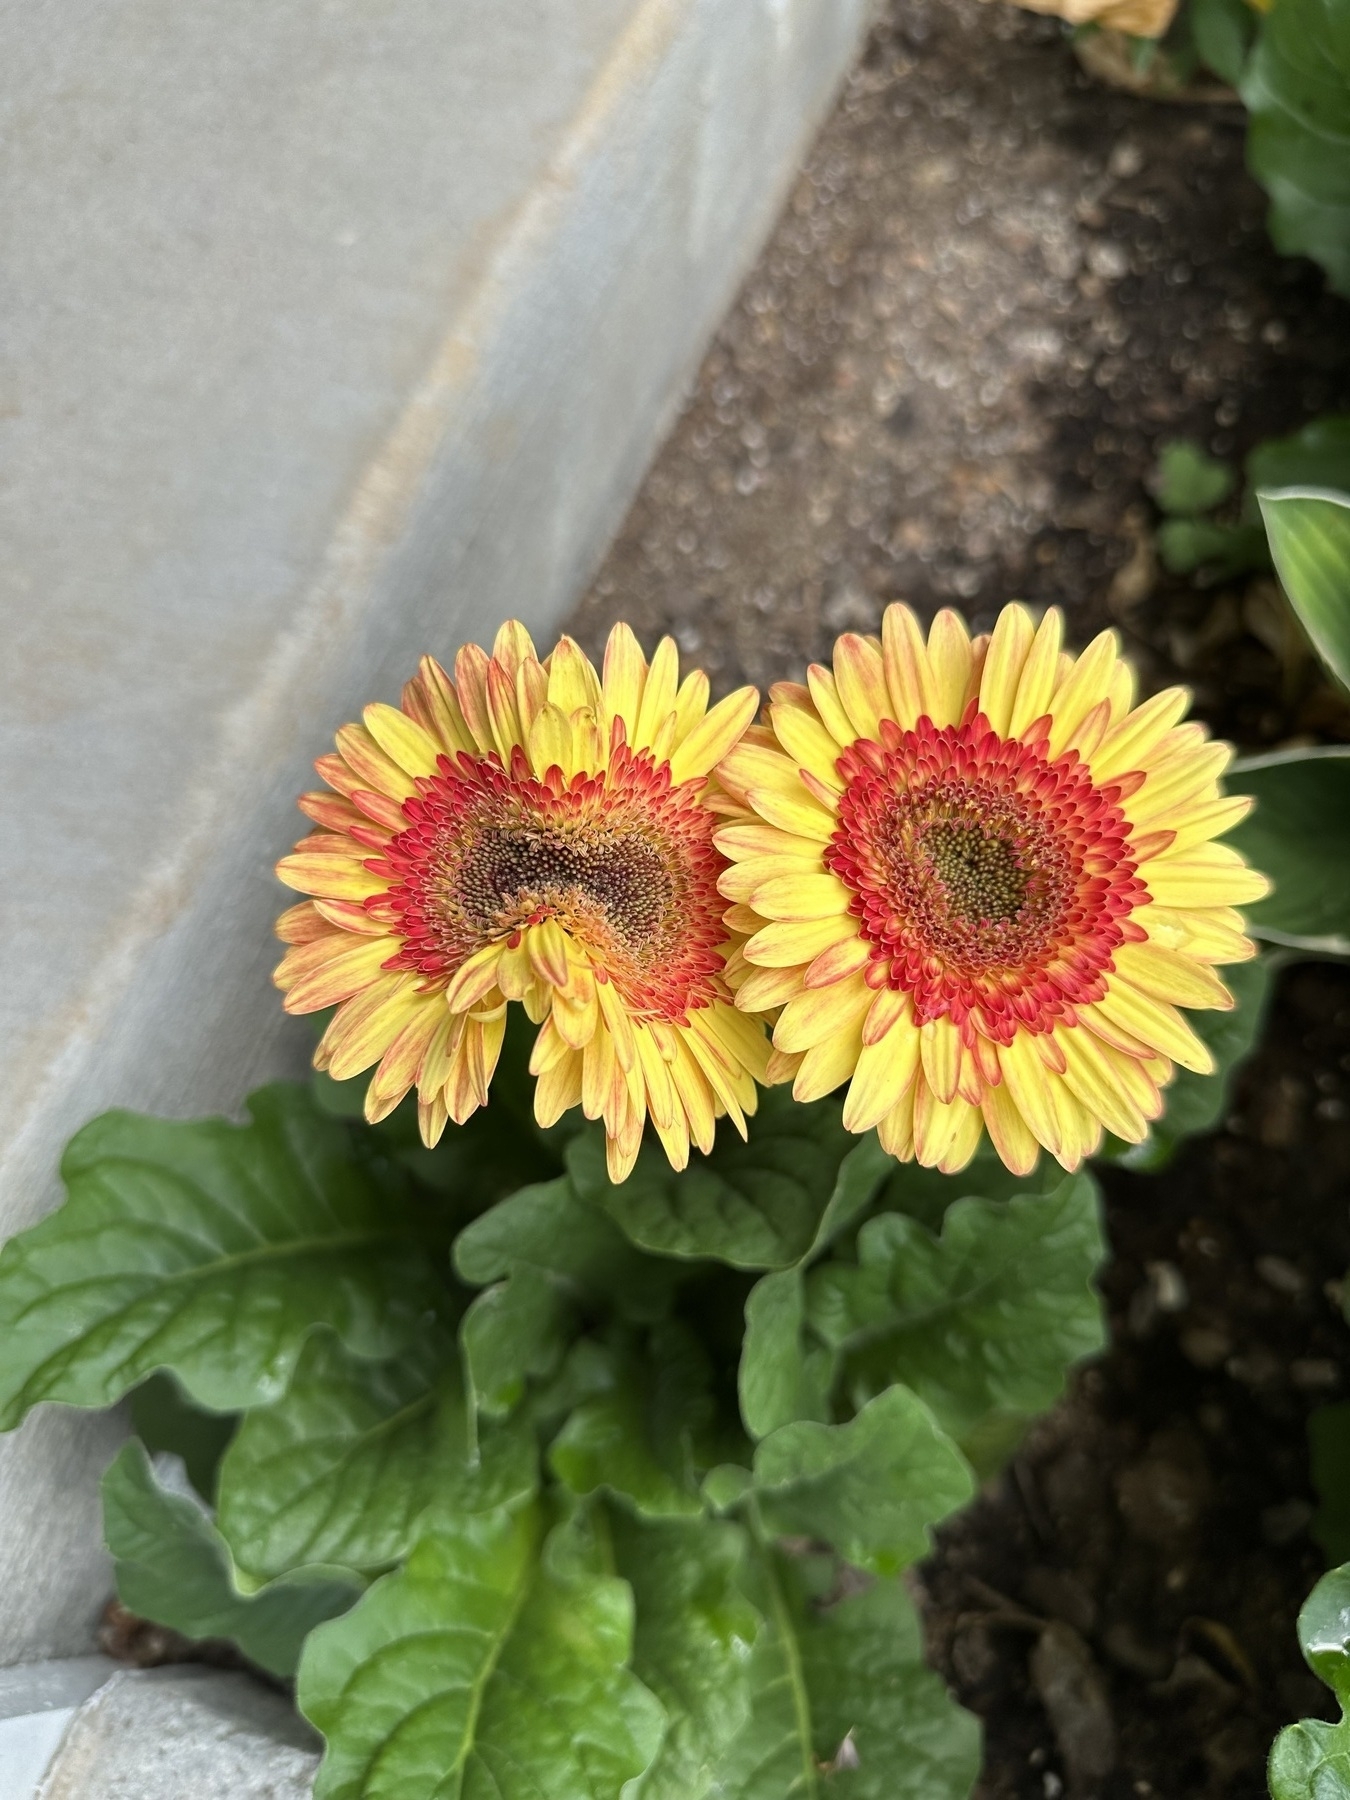 Gerbera Daisies with one flower exhibiting a unique deformity reminiscent of meiosis.